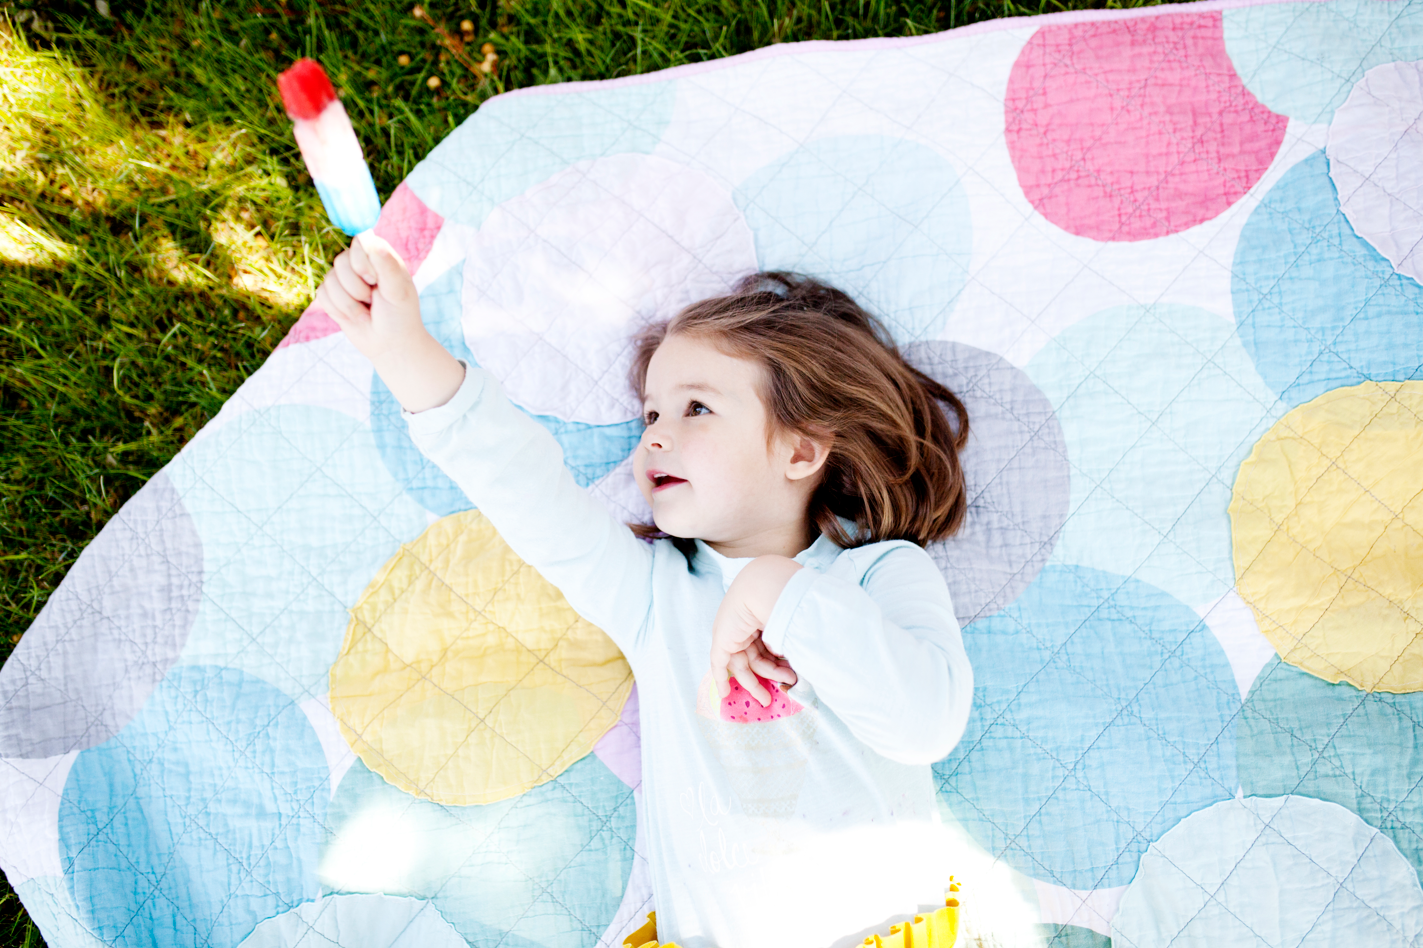 A toddler lying on a picnic blanket in the summer and holding a yogurt popsicle. Concept of summer, toddlers, healthy snacks.